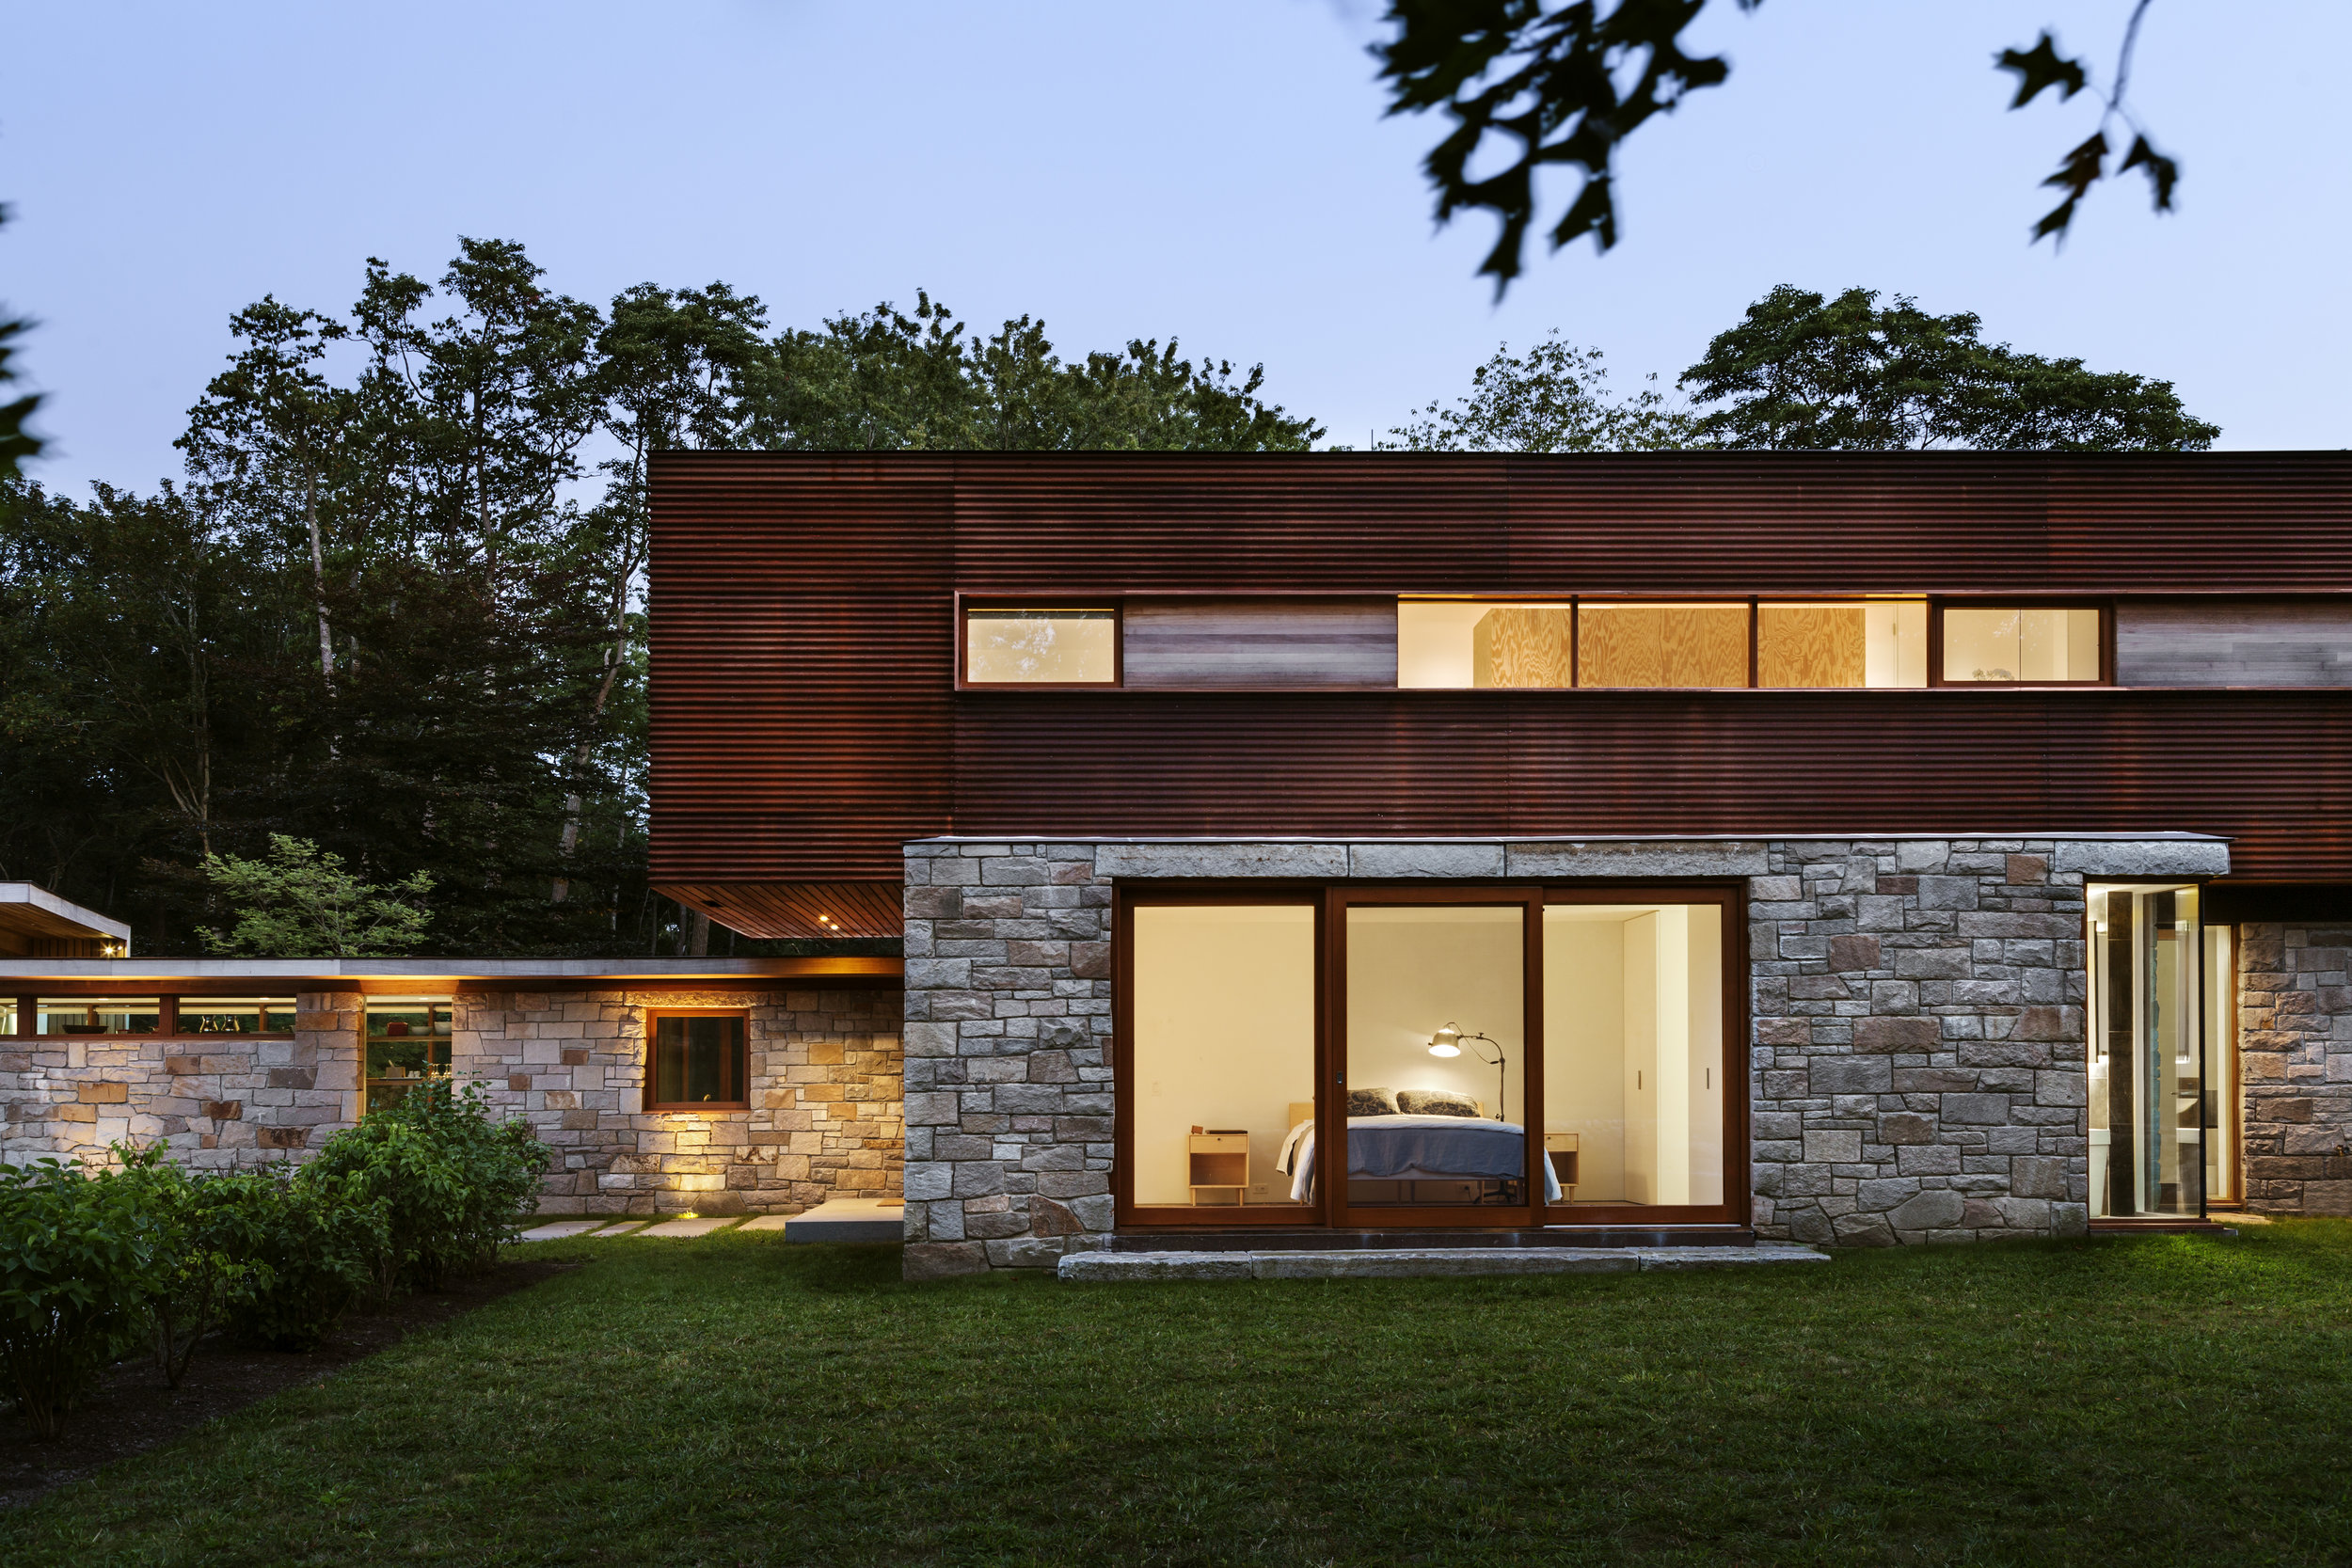 large glass windows with stone veneer and wood architecture